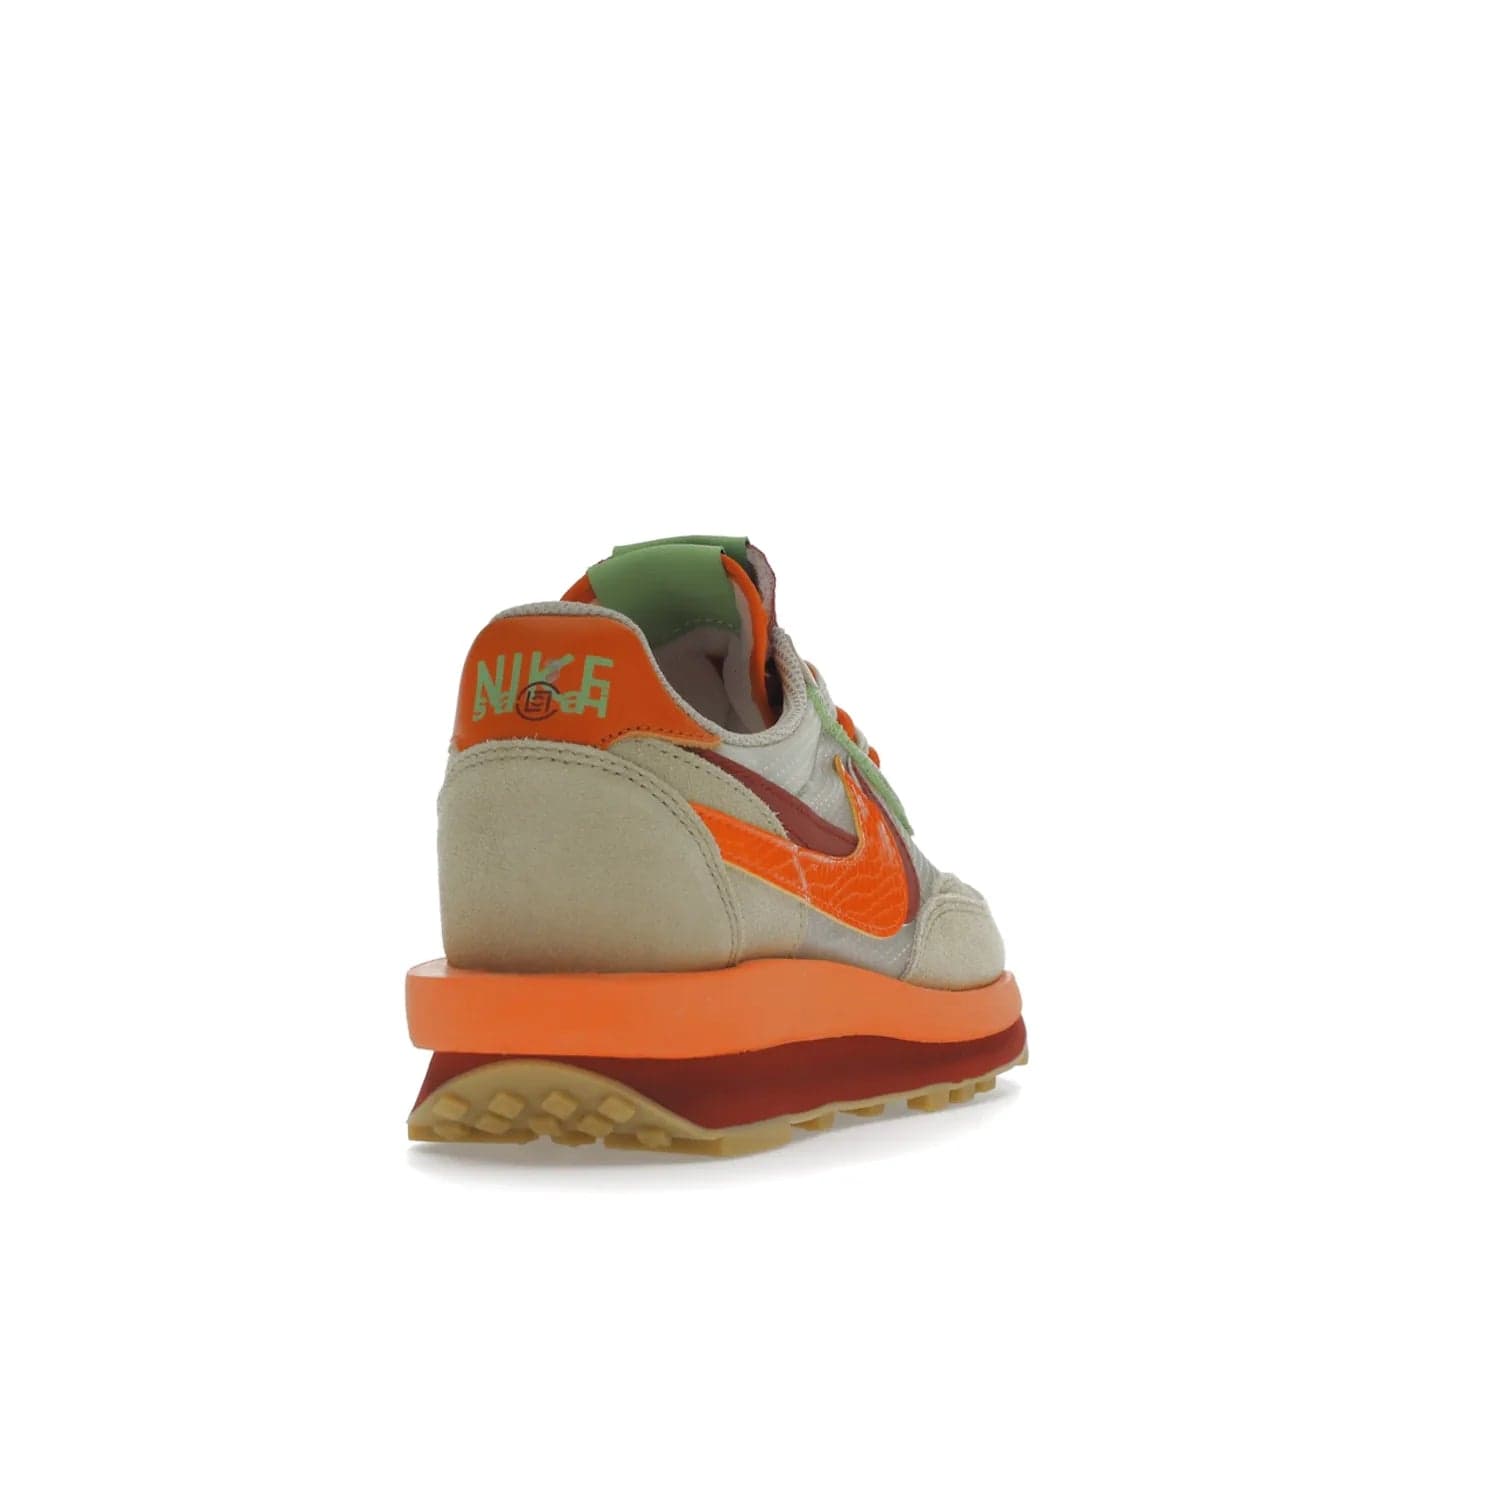 Nike LD Waffle sacai CLOT Kiss of Death Net Orange Blaze - Image 30 - Only at www.BallersClubKickz.com - A bold and stylish Nike LD Waffle sacai CLOT Kiss of Death Net Orange Blaze sneaker featuring a unique off-white, Deep Red & Orange Blaze Swooshes, two-toned stacked sole and doubled tongue. Available in September 2021. Make a statement.